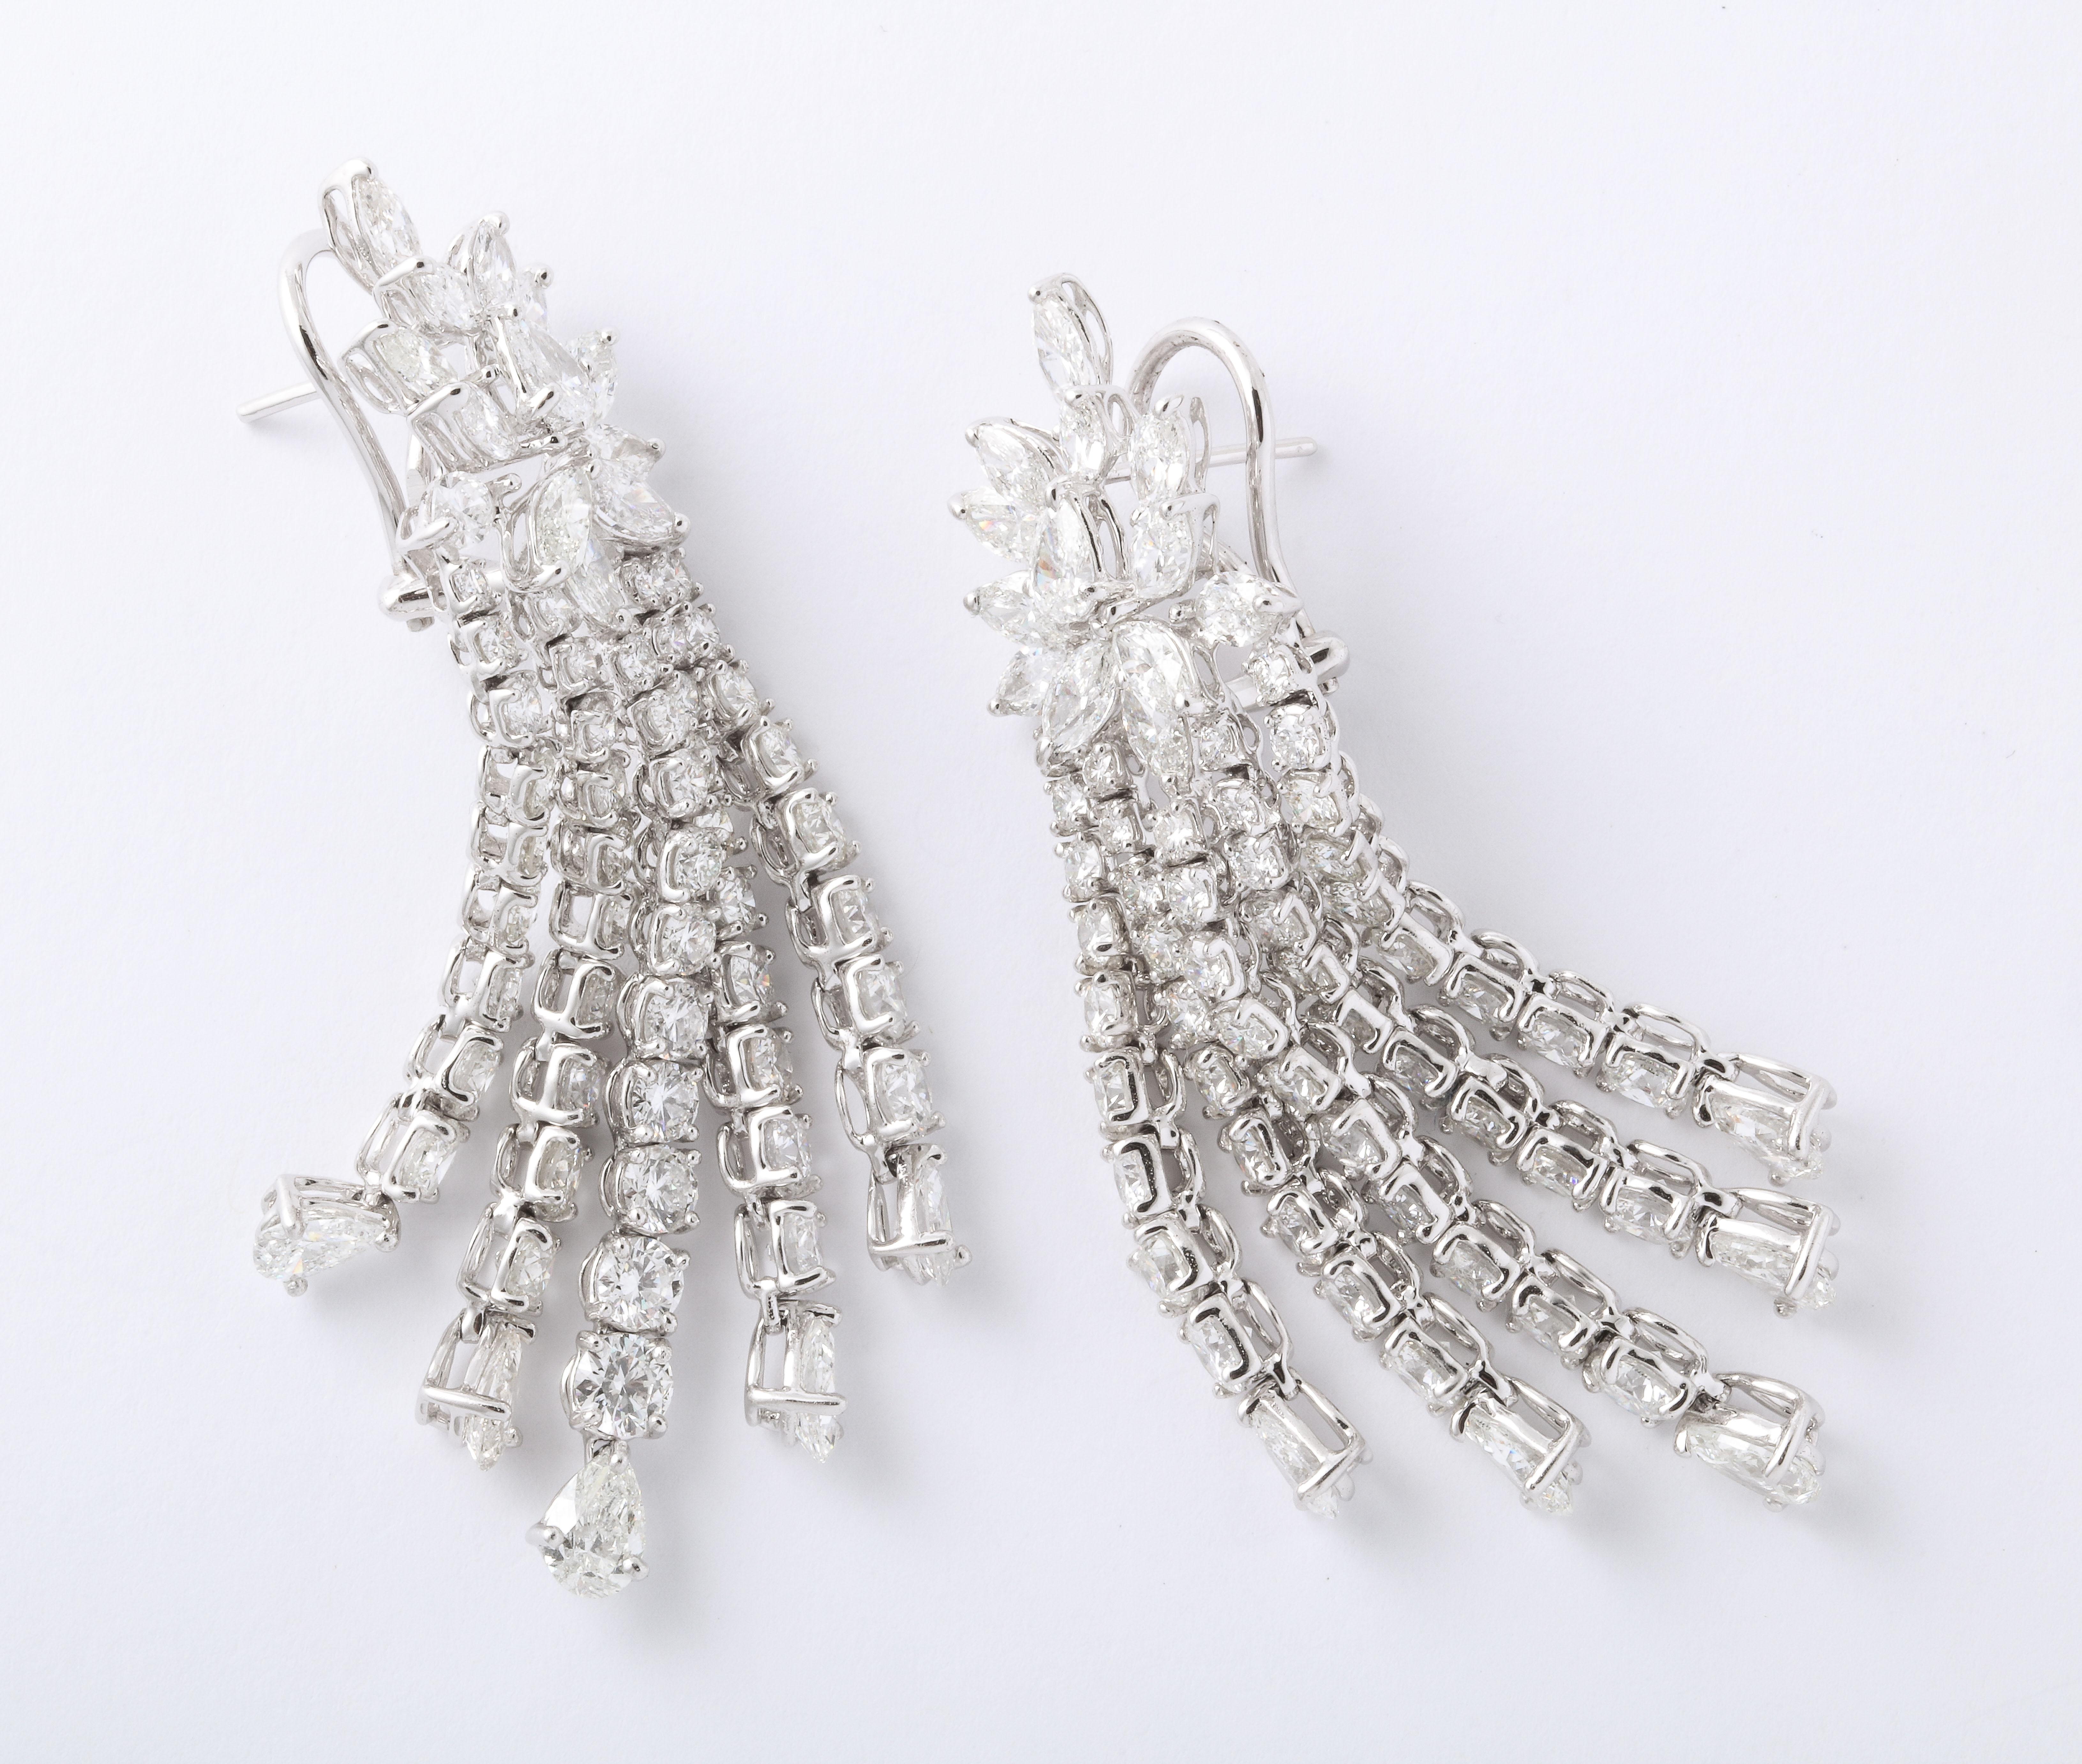 
A fabulous pair of timeless diamond earrings.

5 rows of round brilliant cut and pear shape strands dangle from pear shape and marquise clusters.

22.06 carats of white diamonds set in 18k white gold.

approximately 2.5 inches long, .60 inches at